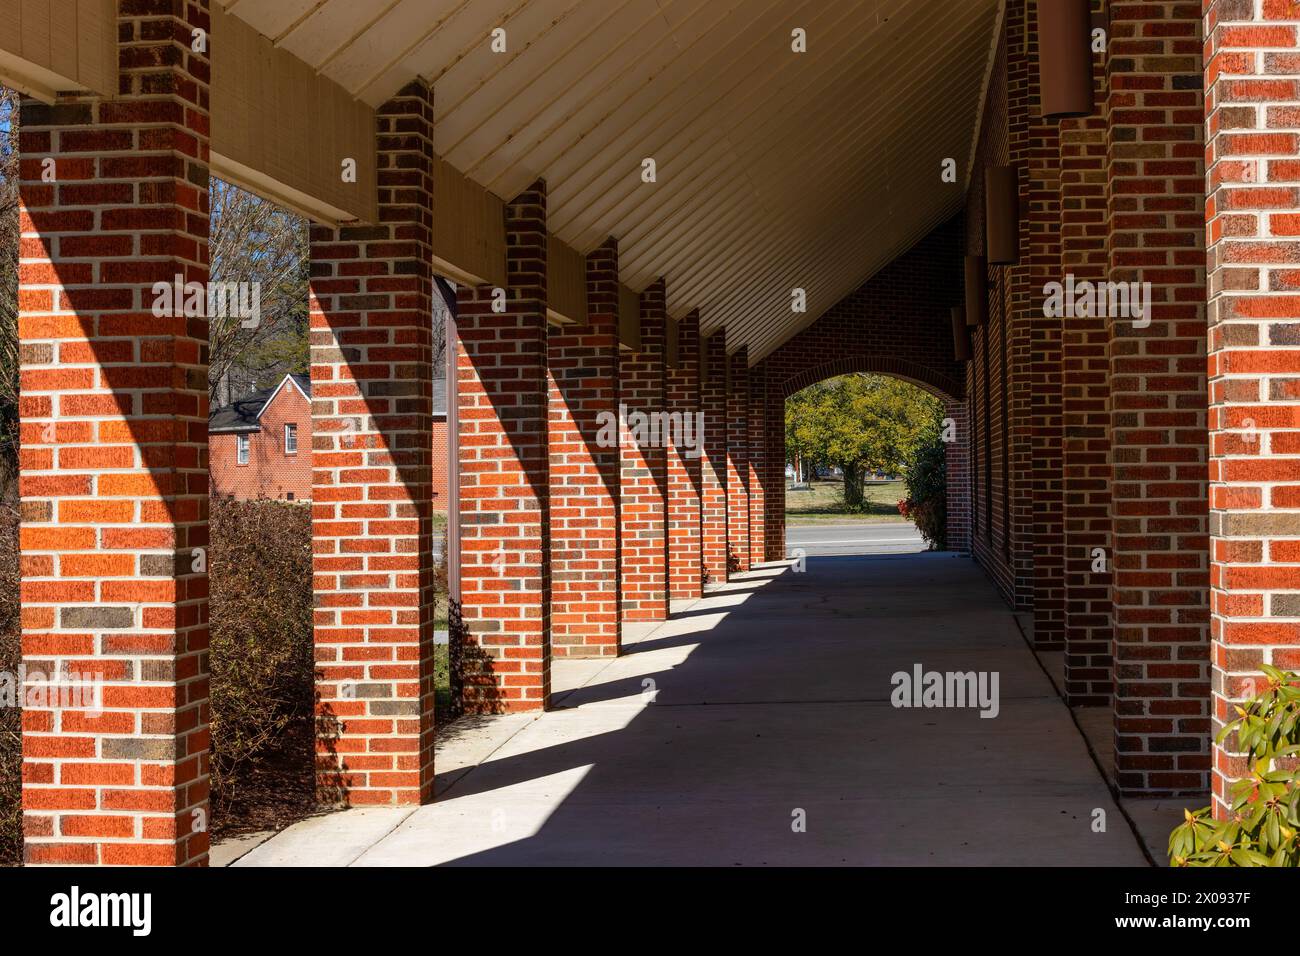 Outdoor covered walkway attached to a brick building in downtown Big Stone Gap, Virginia, USA Stock Photo